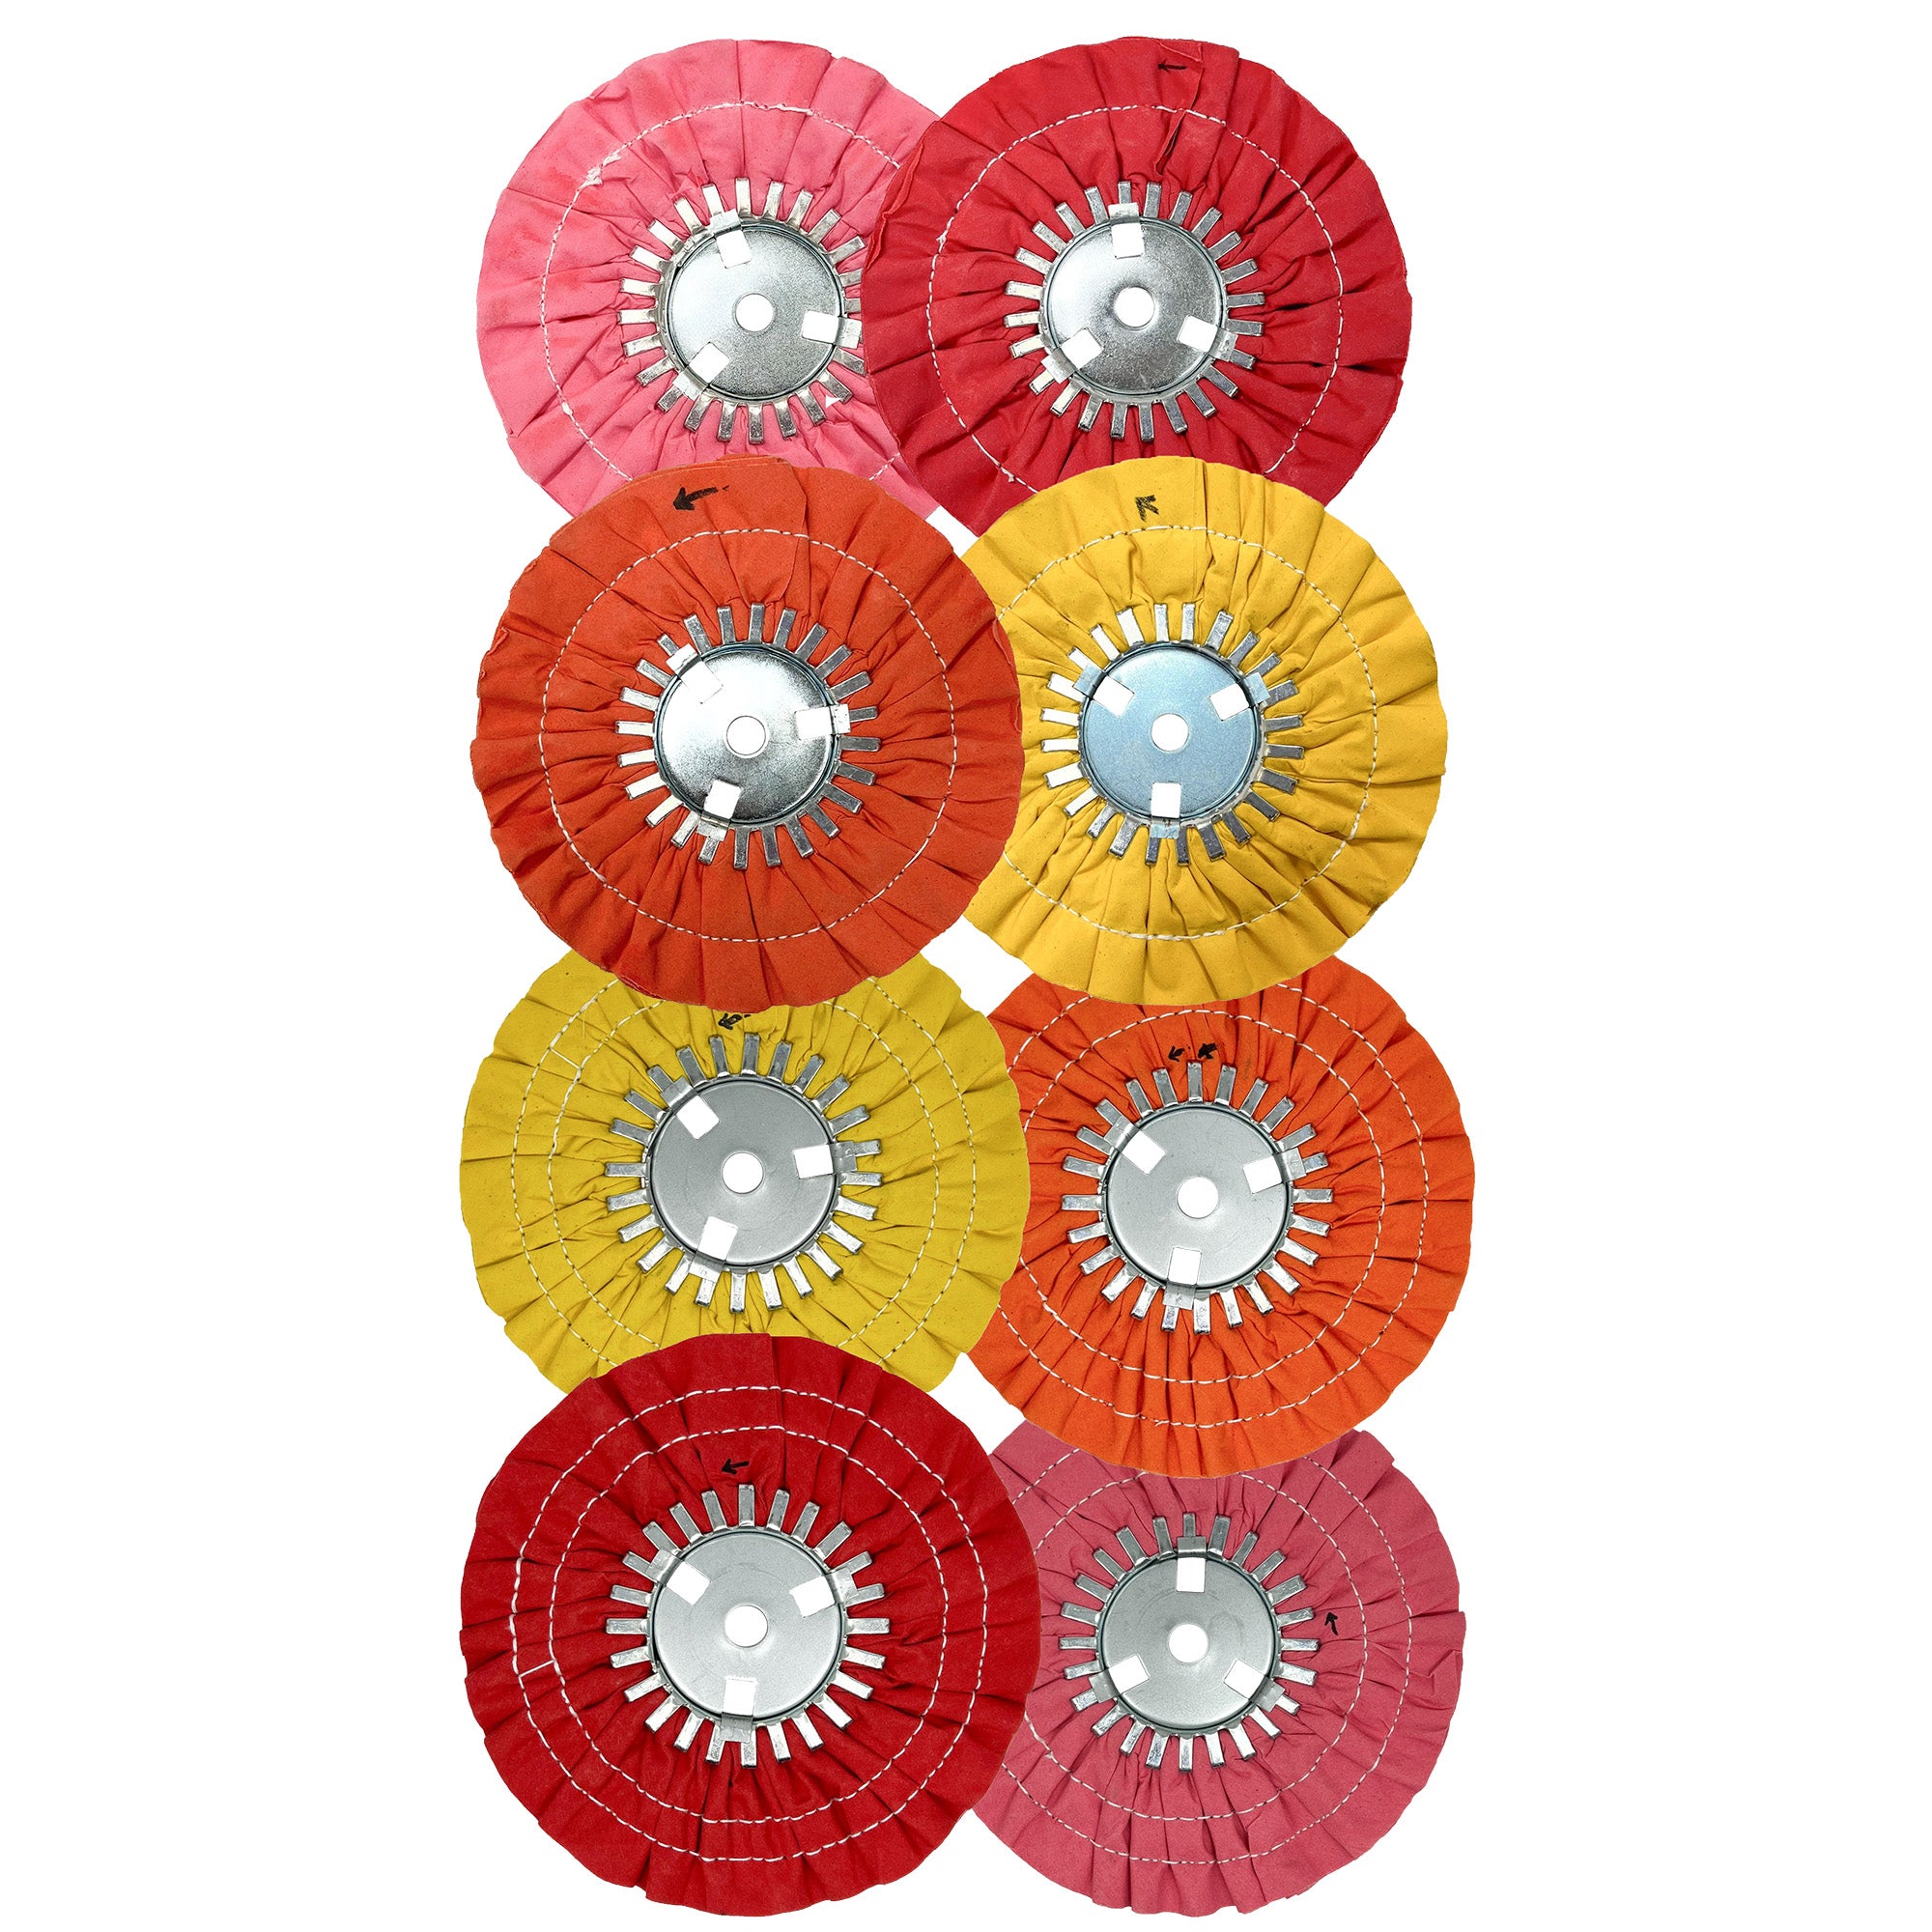 SPARES2GO Metal Cleaning Polishing Buffing Wheel & Compound Polish